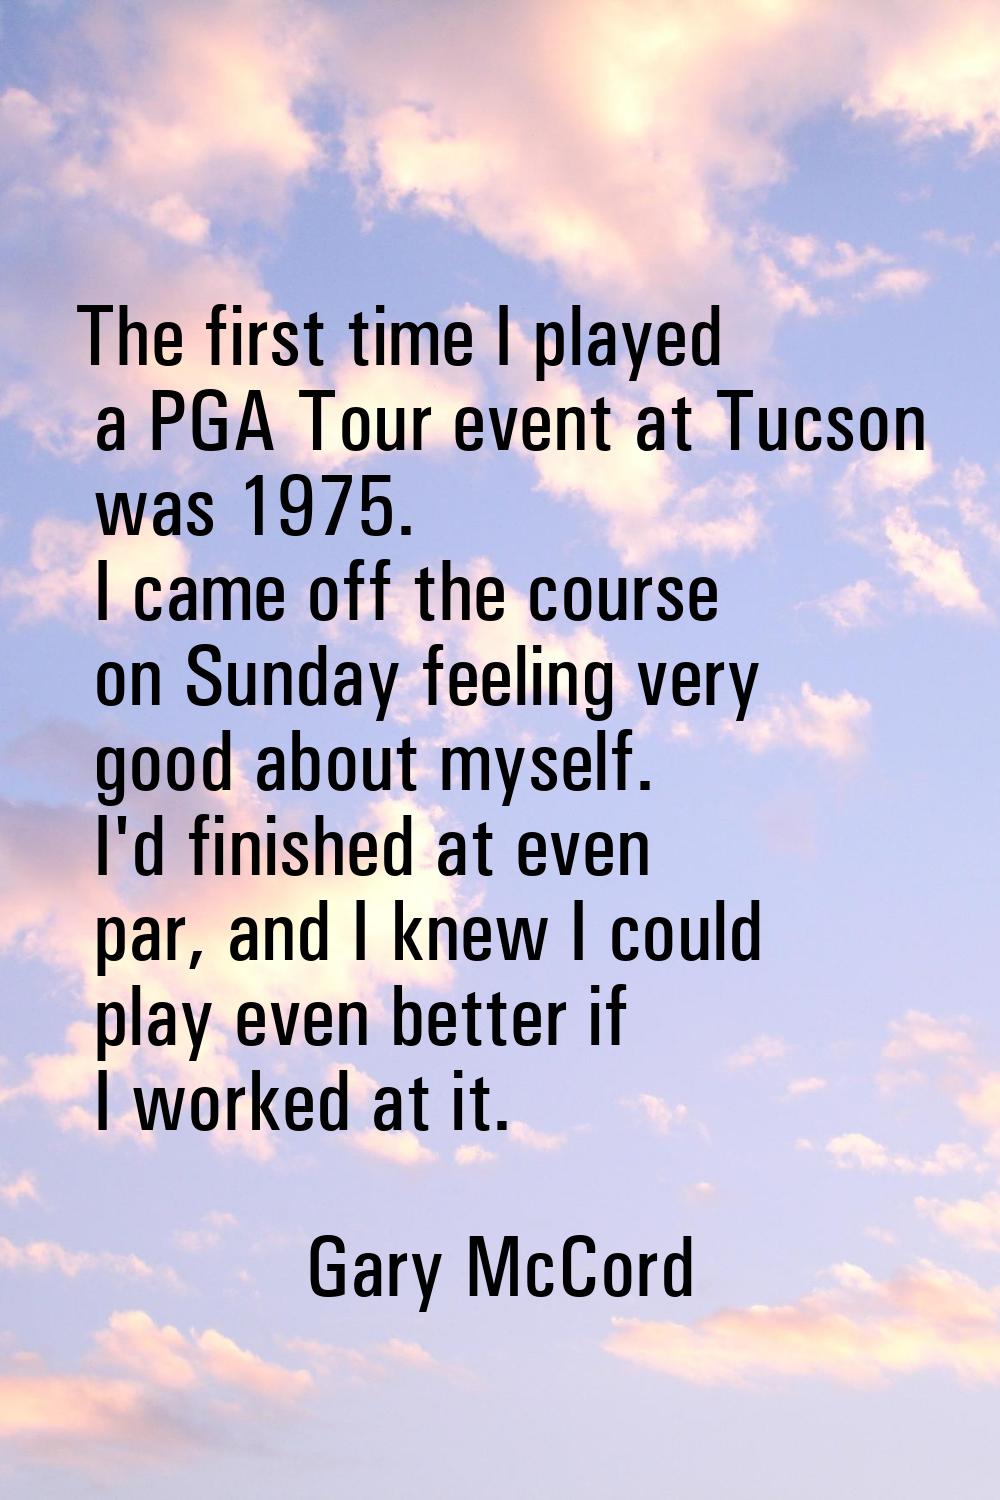 The first time I played a PGA Tour event at Tucson was 1975. I came off the course on Sunday feelin